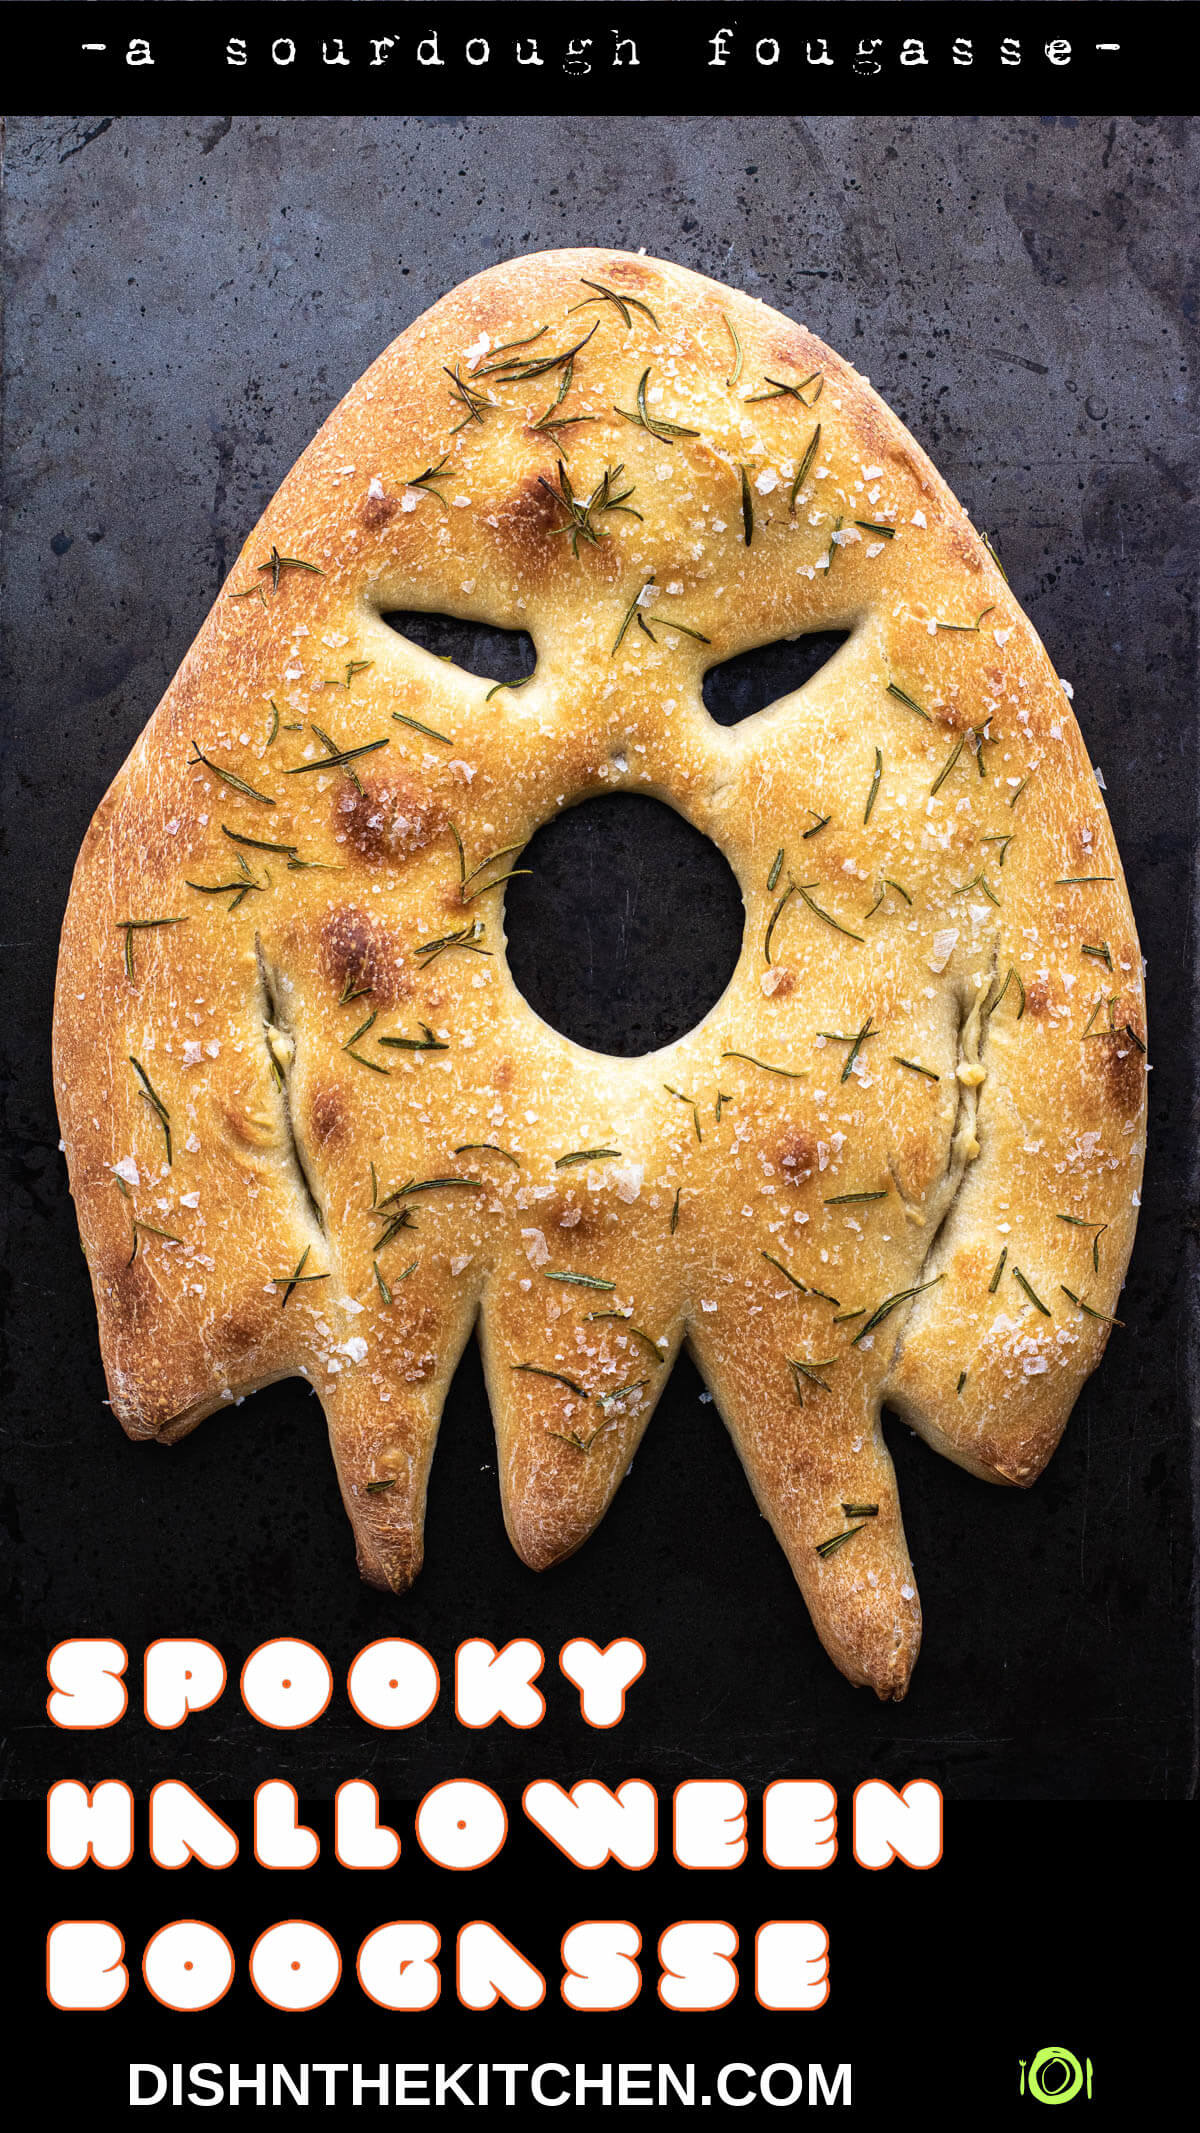 Pinterest image of a ghost shaped fougasse flat bread on a dark baking pan.